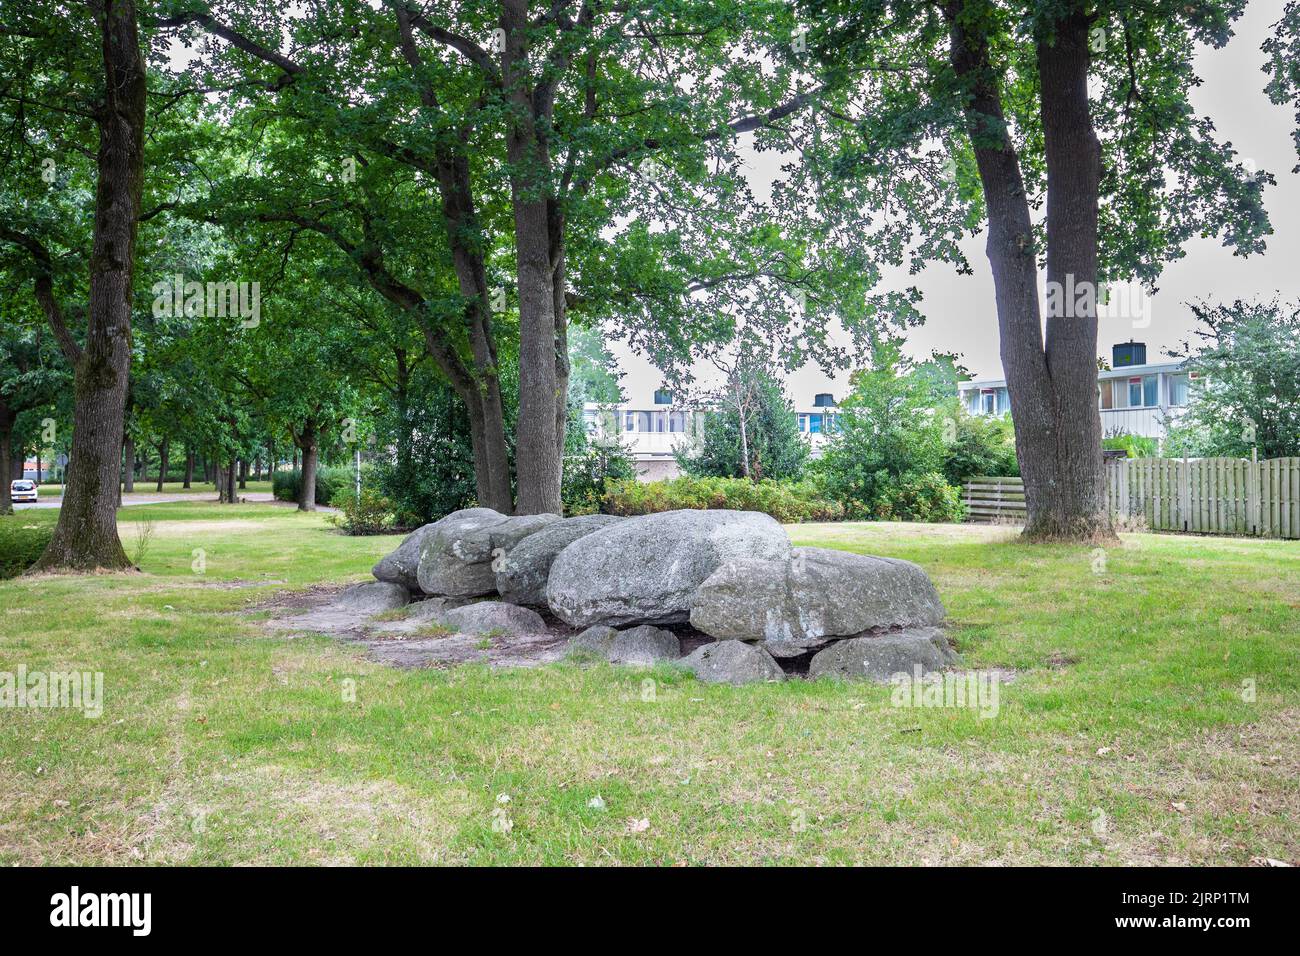 Dolmen D47, Haselackers municipality of Emmen in the Dutch province of Drenthe is a Neolithic Tomb and protected historical monument in an urban envir Stock Photo